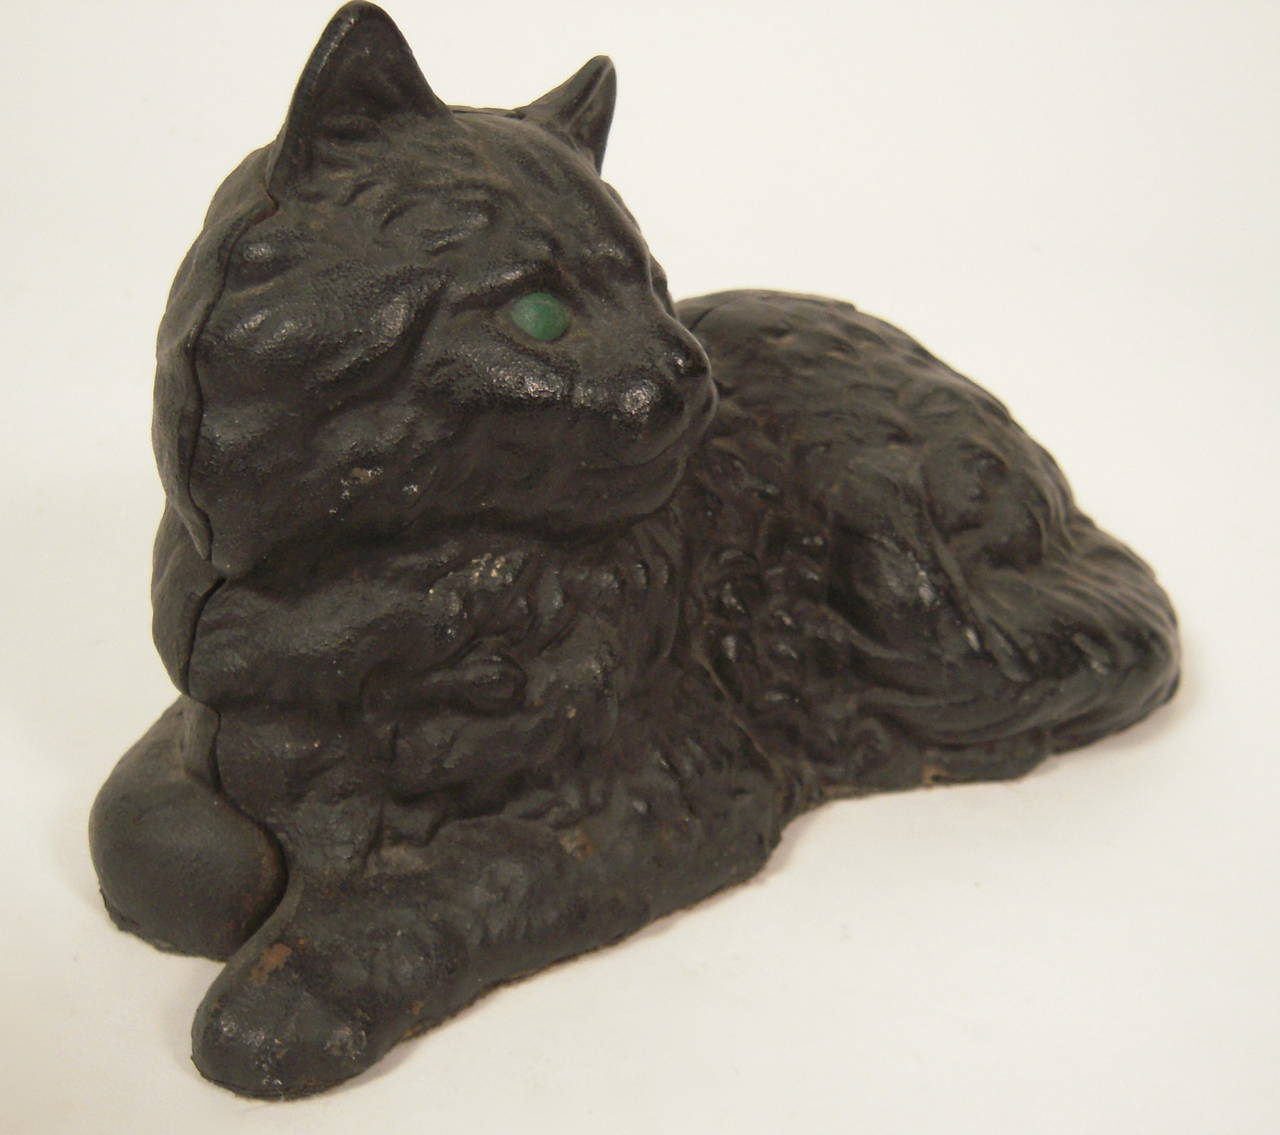 A painted cast iron doorstop of a reclining cat, black with green eyes, in original surface, attributed to Hubley, American, circa 1920s.